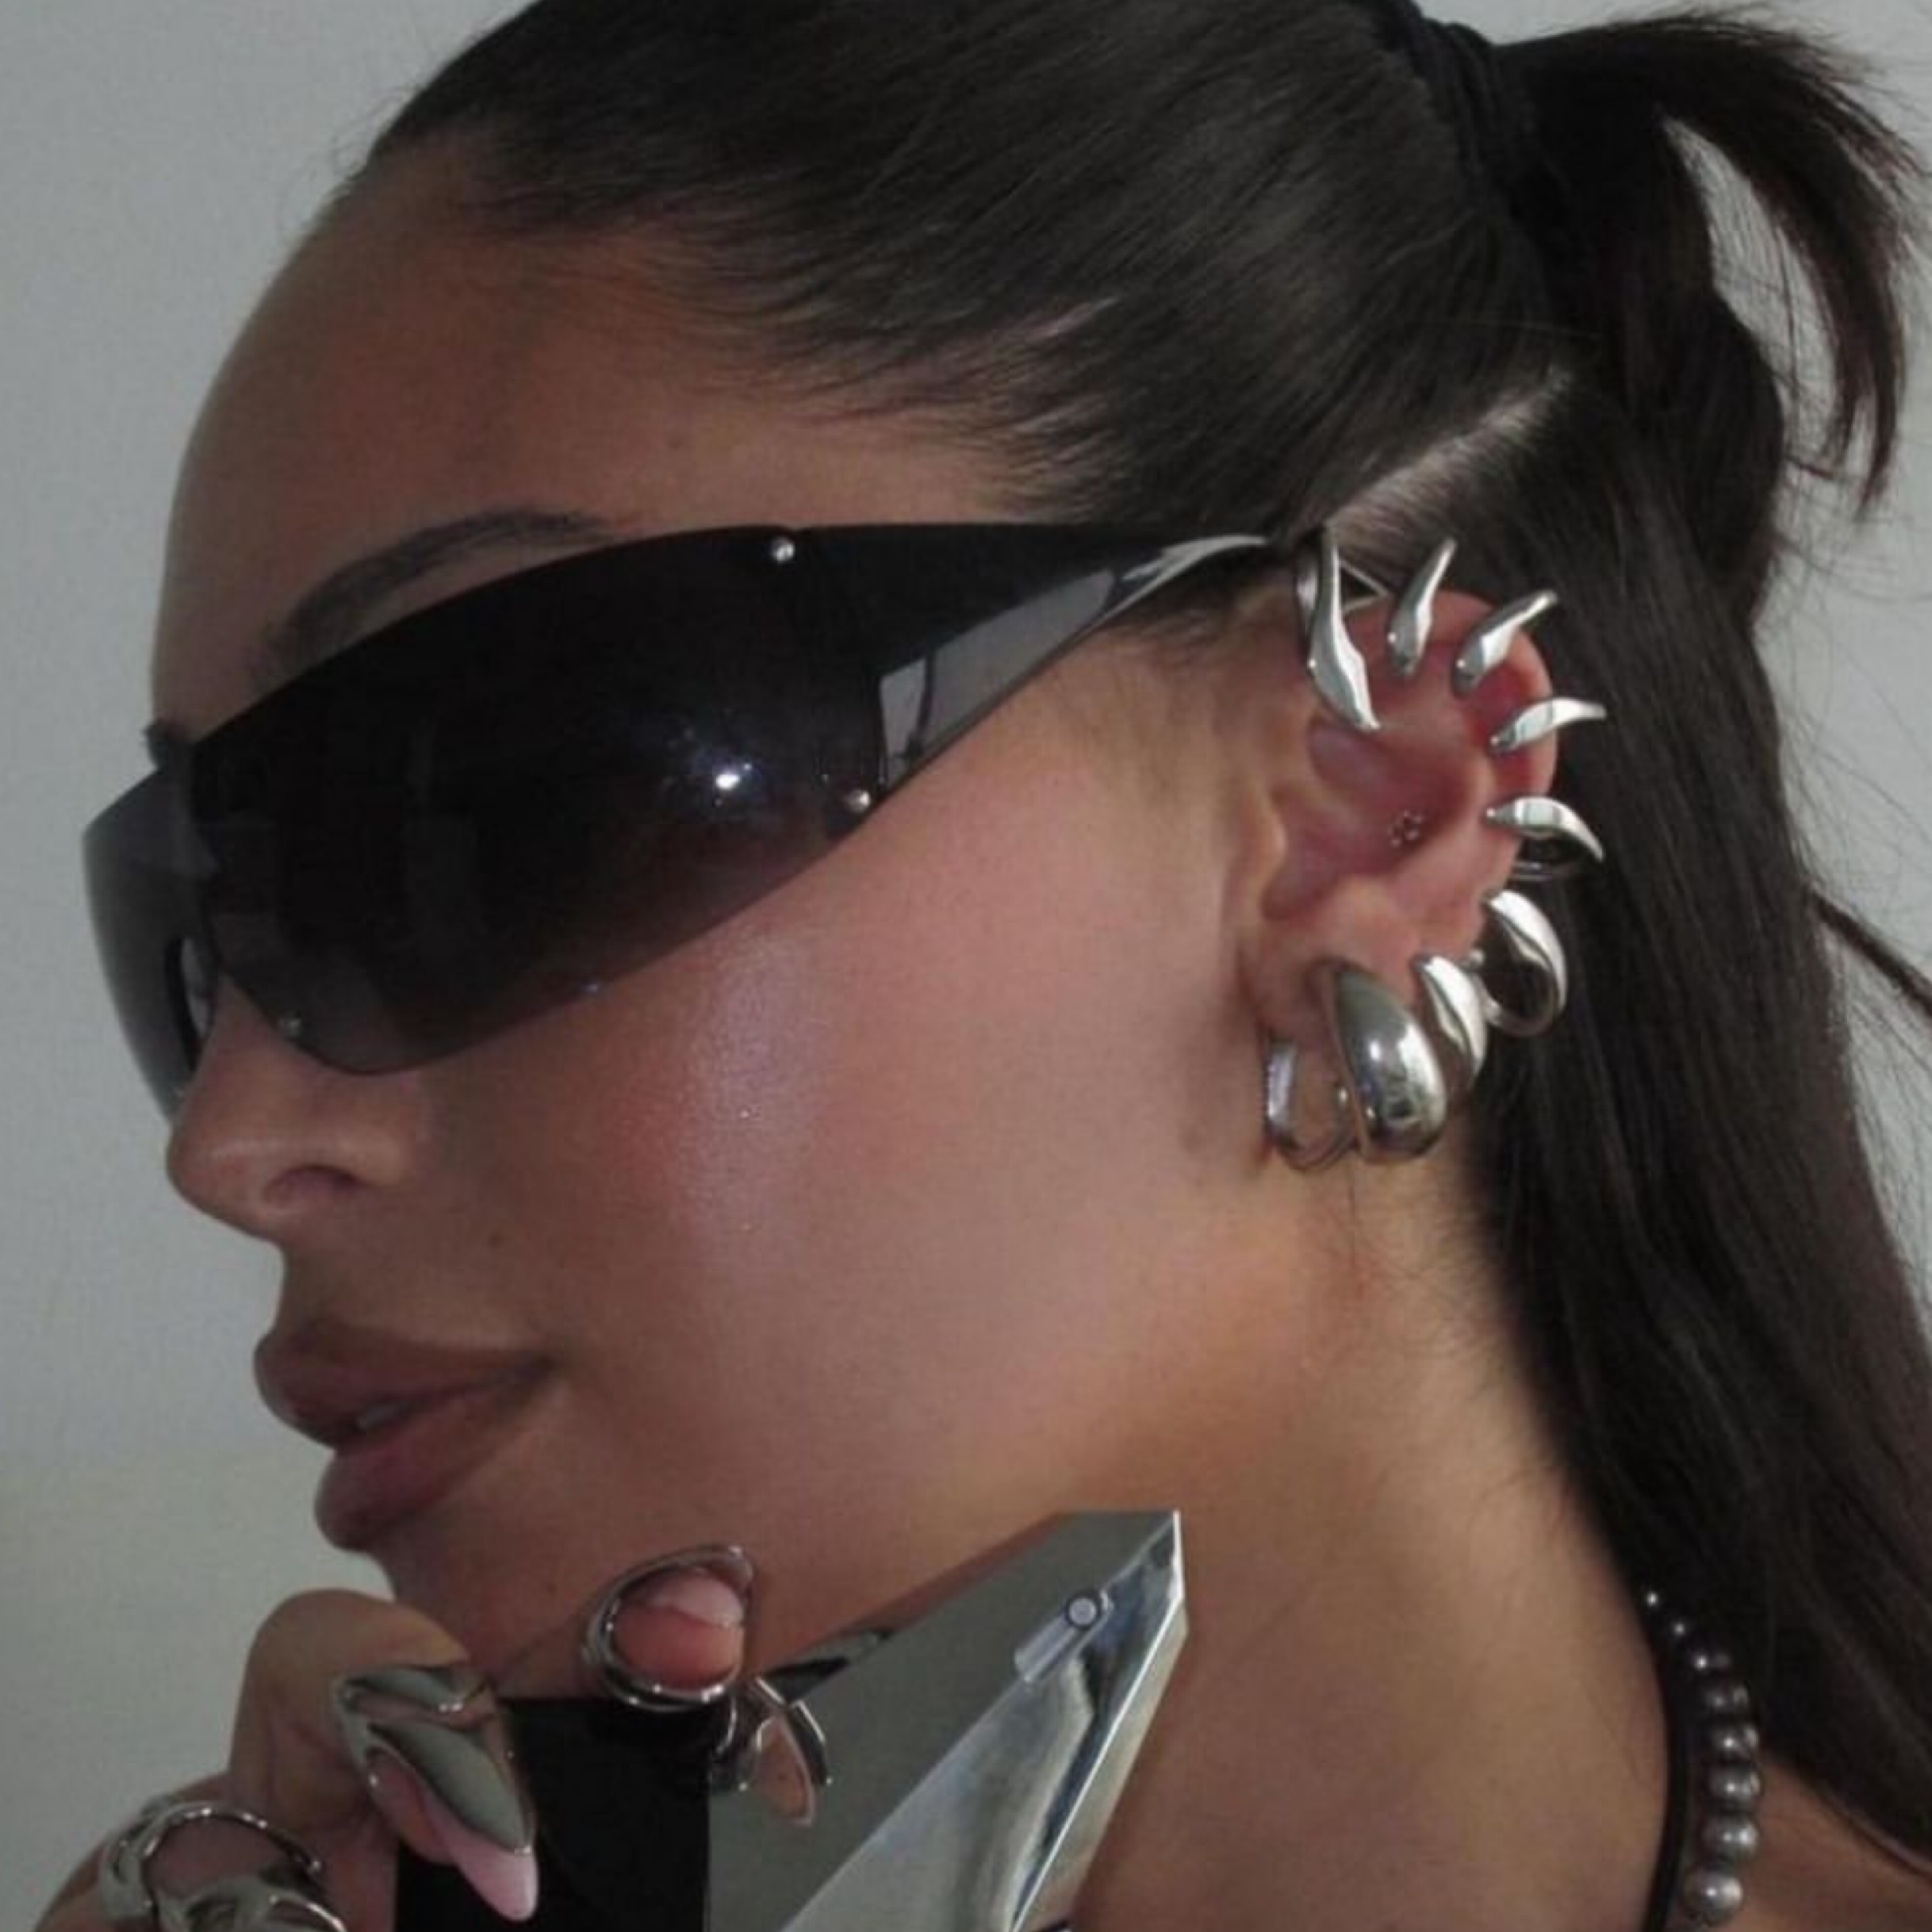 Three Spy Kids-inspired sunglasses you need in your life